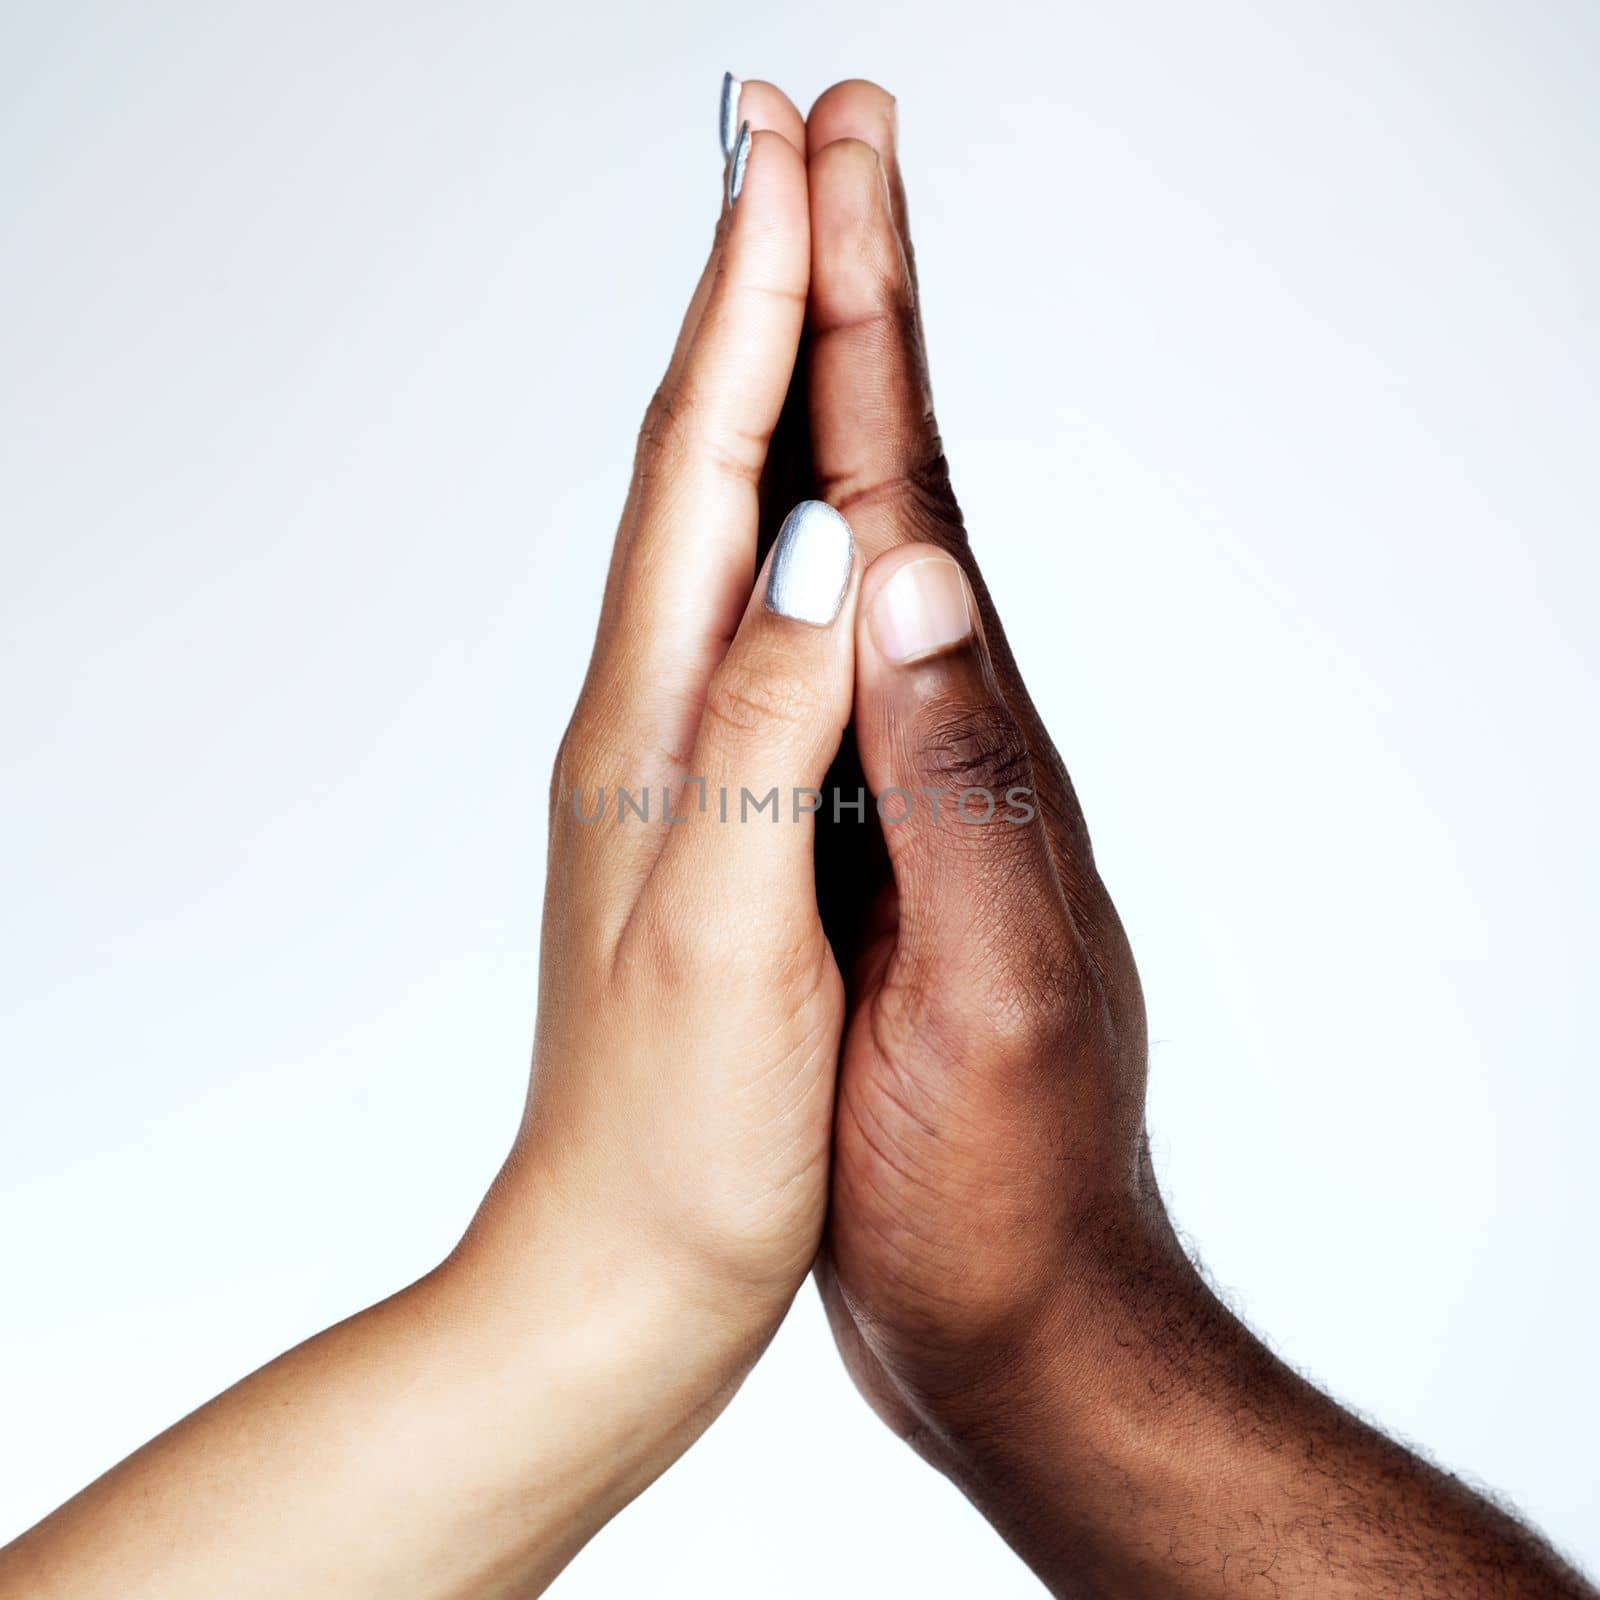 Feel the energy. Studio shot of two unrecognizable people holding their hands together against a grey background